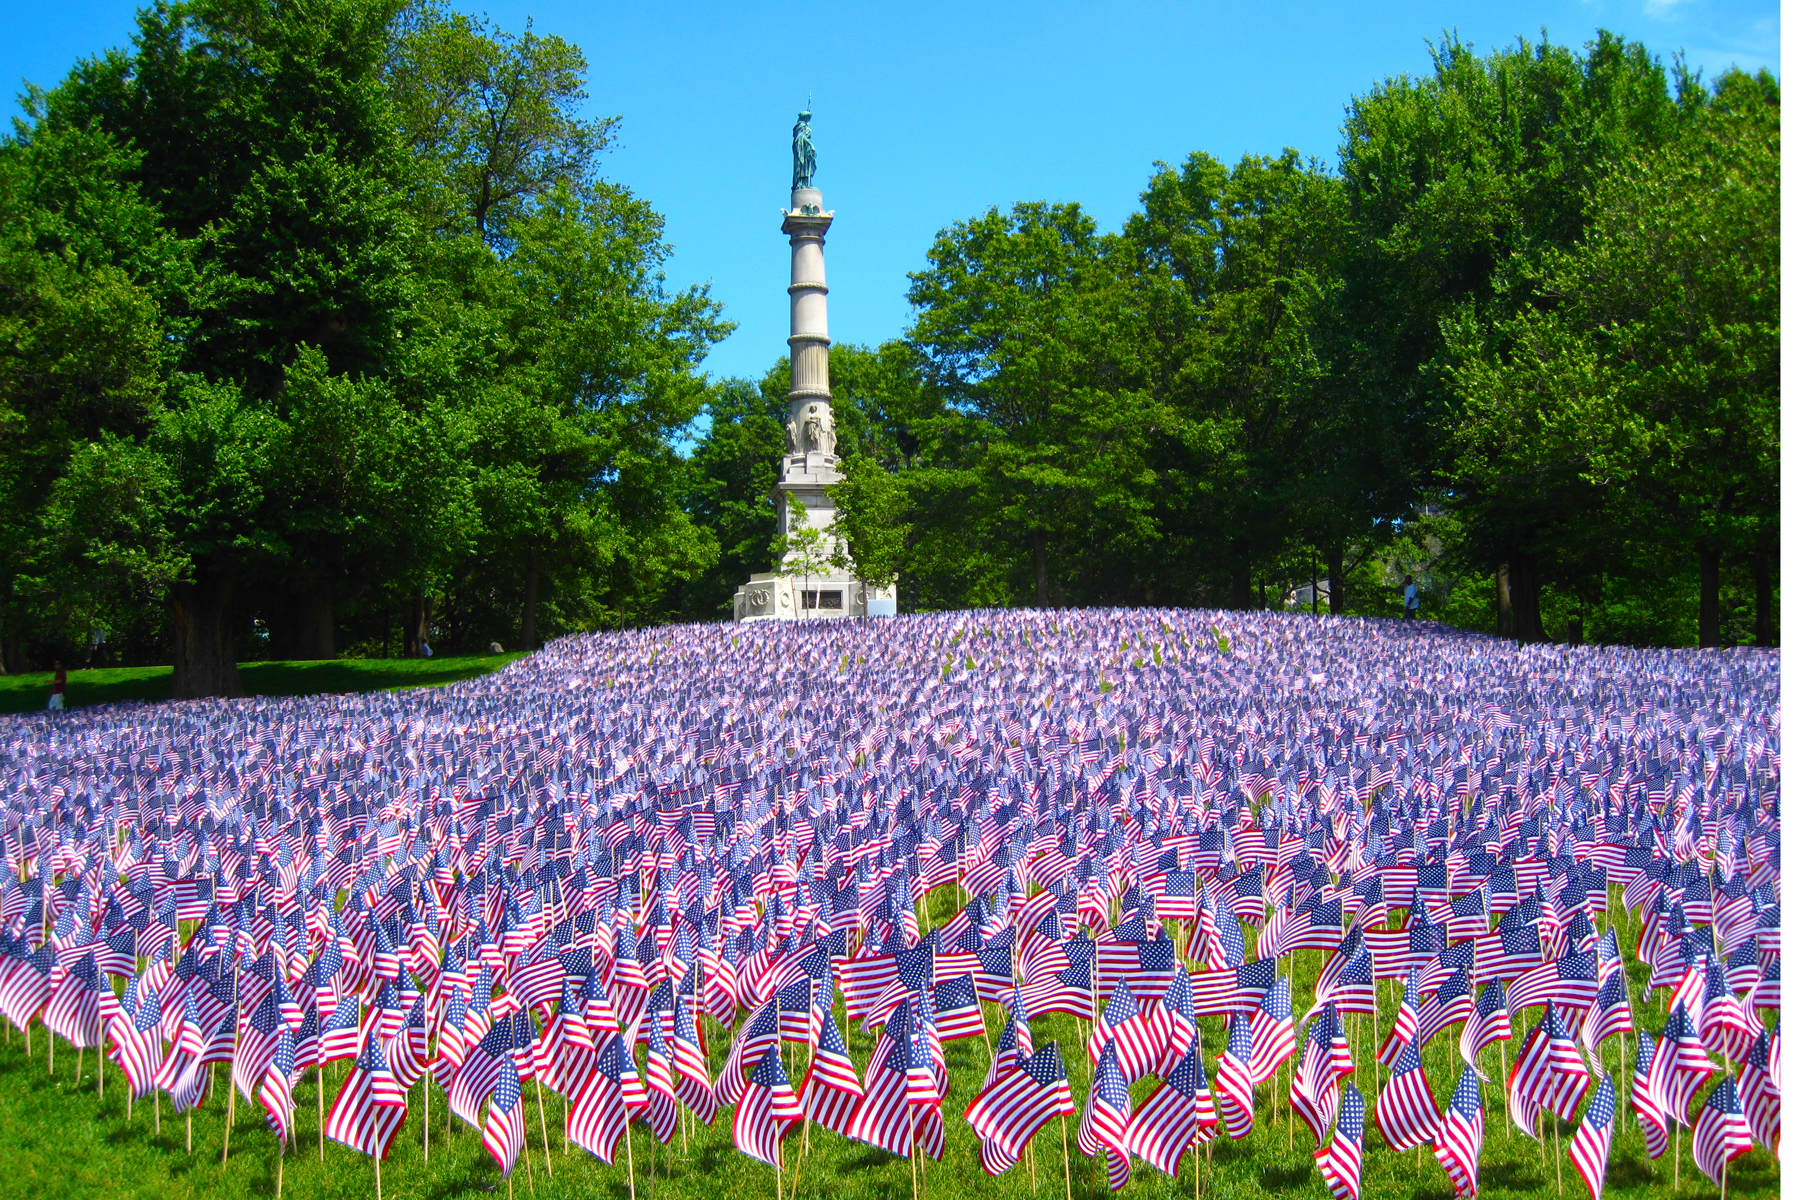 A Sea Of Flags, Boston Common (user submitted)